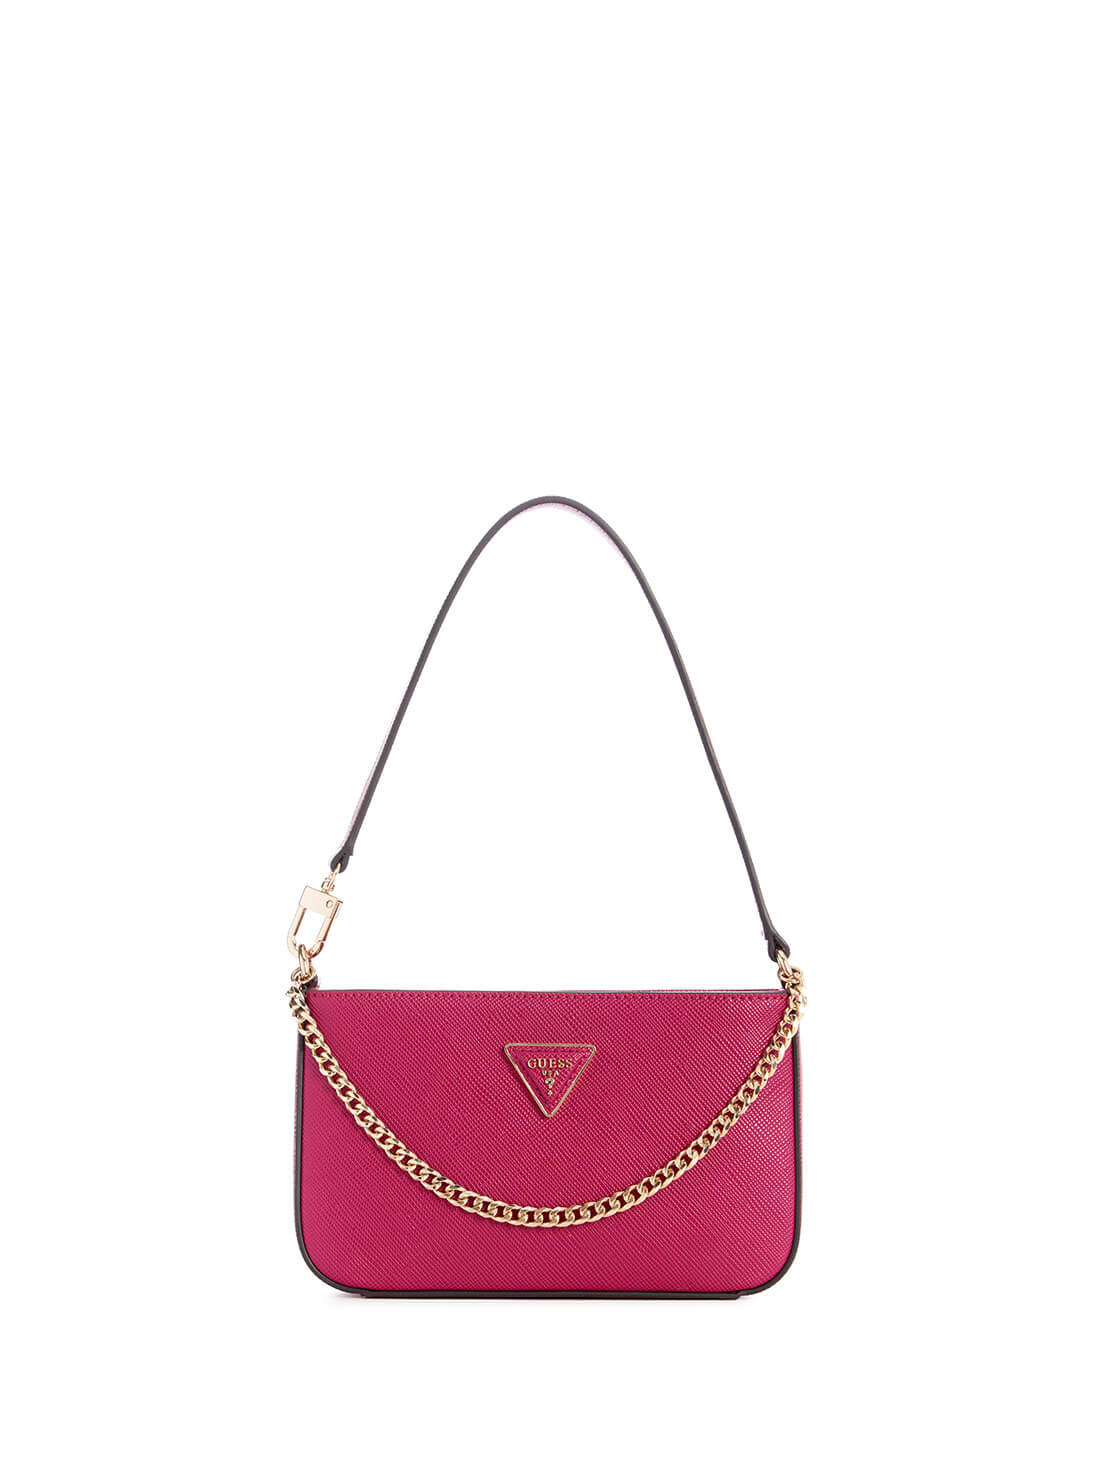 Women's Boysenberry Pink Brynlee Mini Shoulder Bag front view